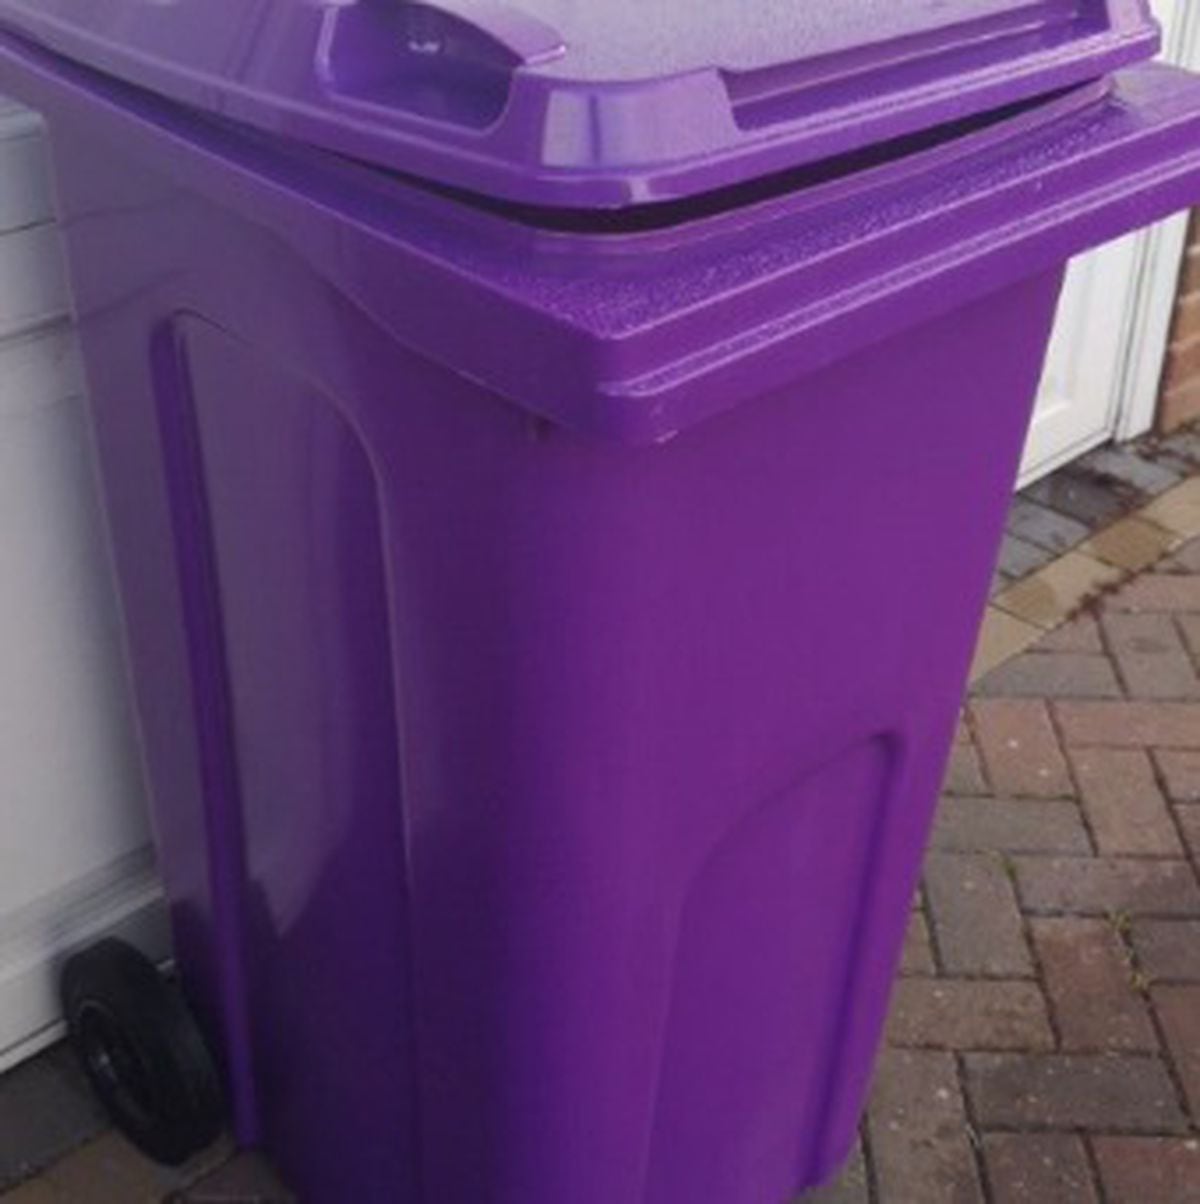 More than 20,000 purple bins rolled-out in Wolverhampton | Express & Star